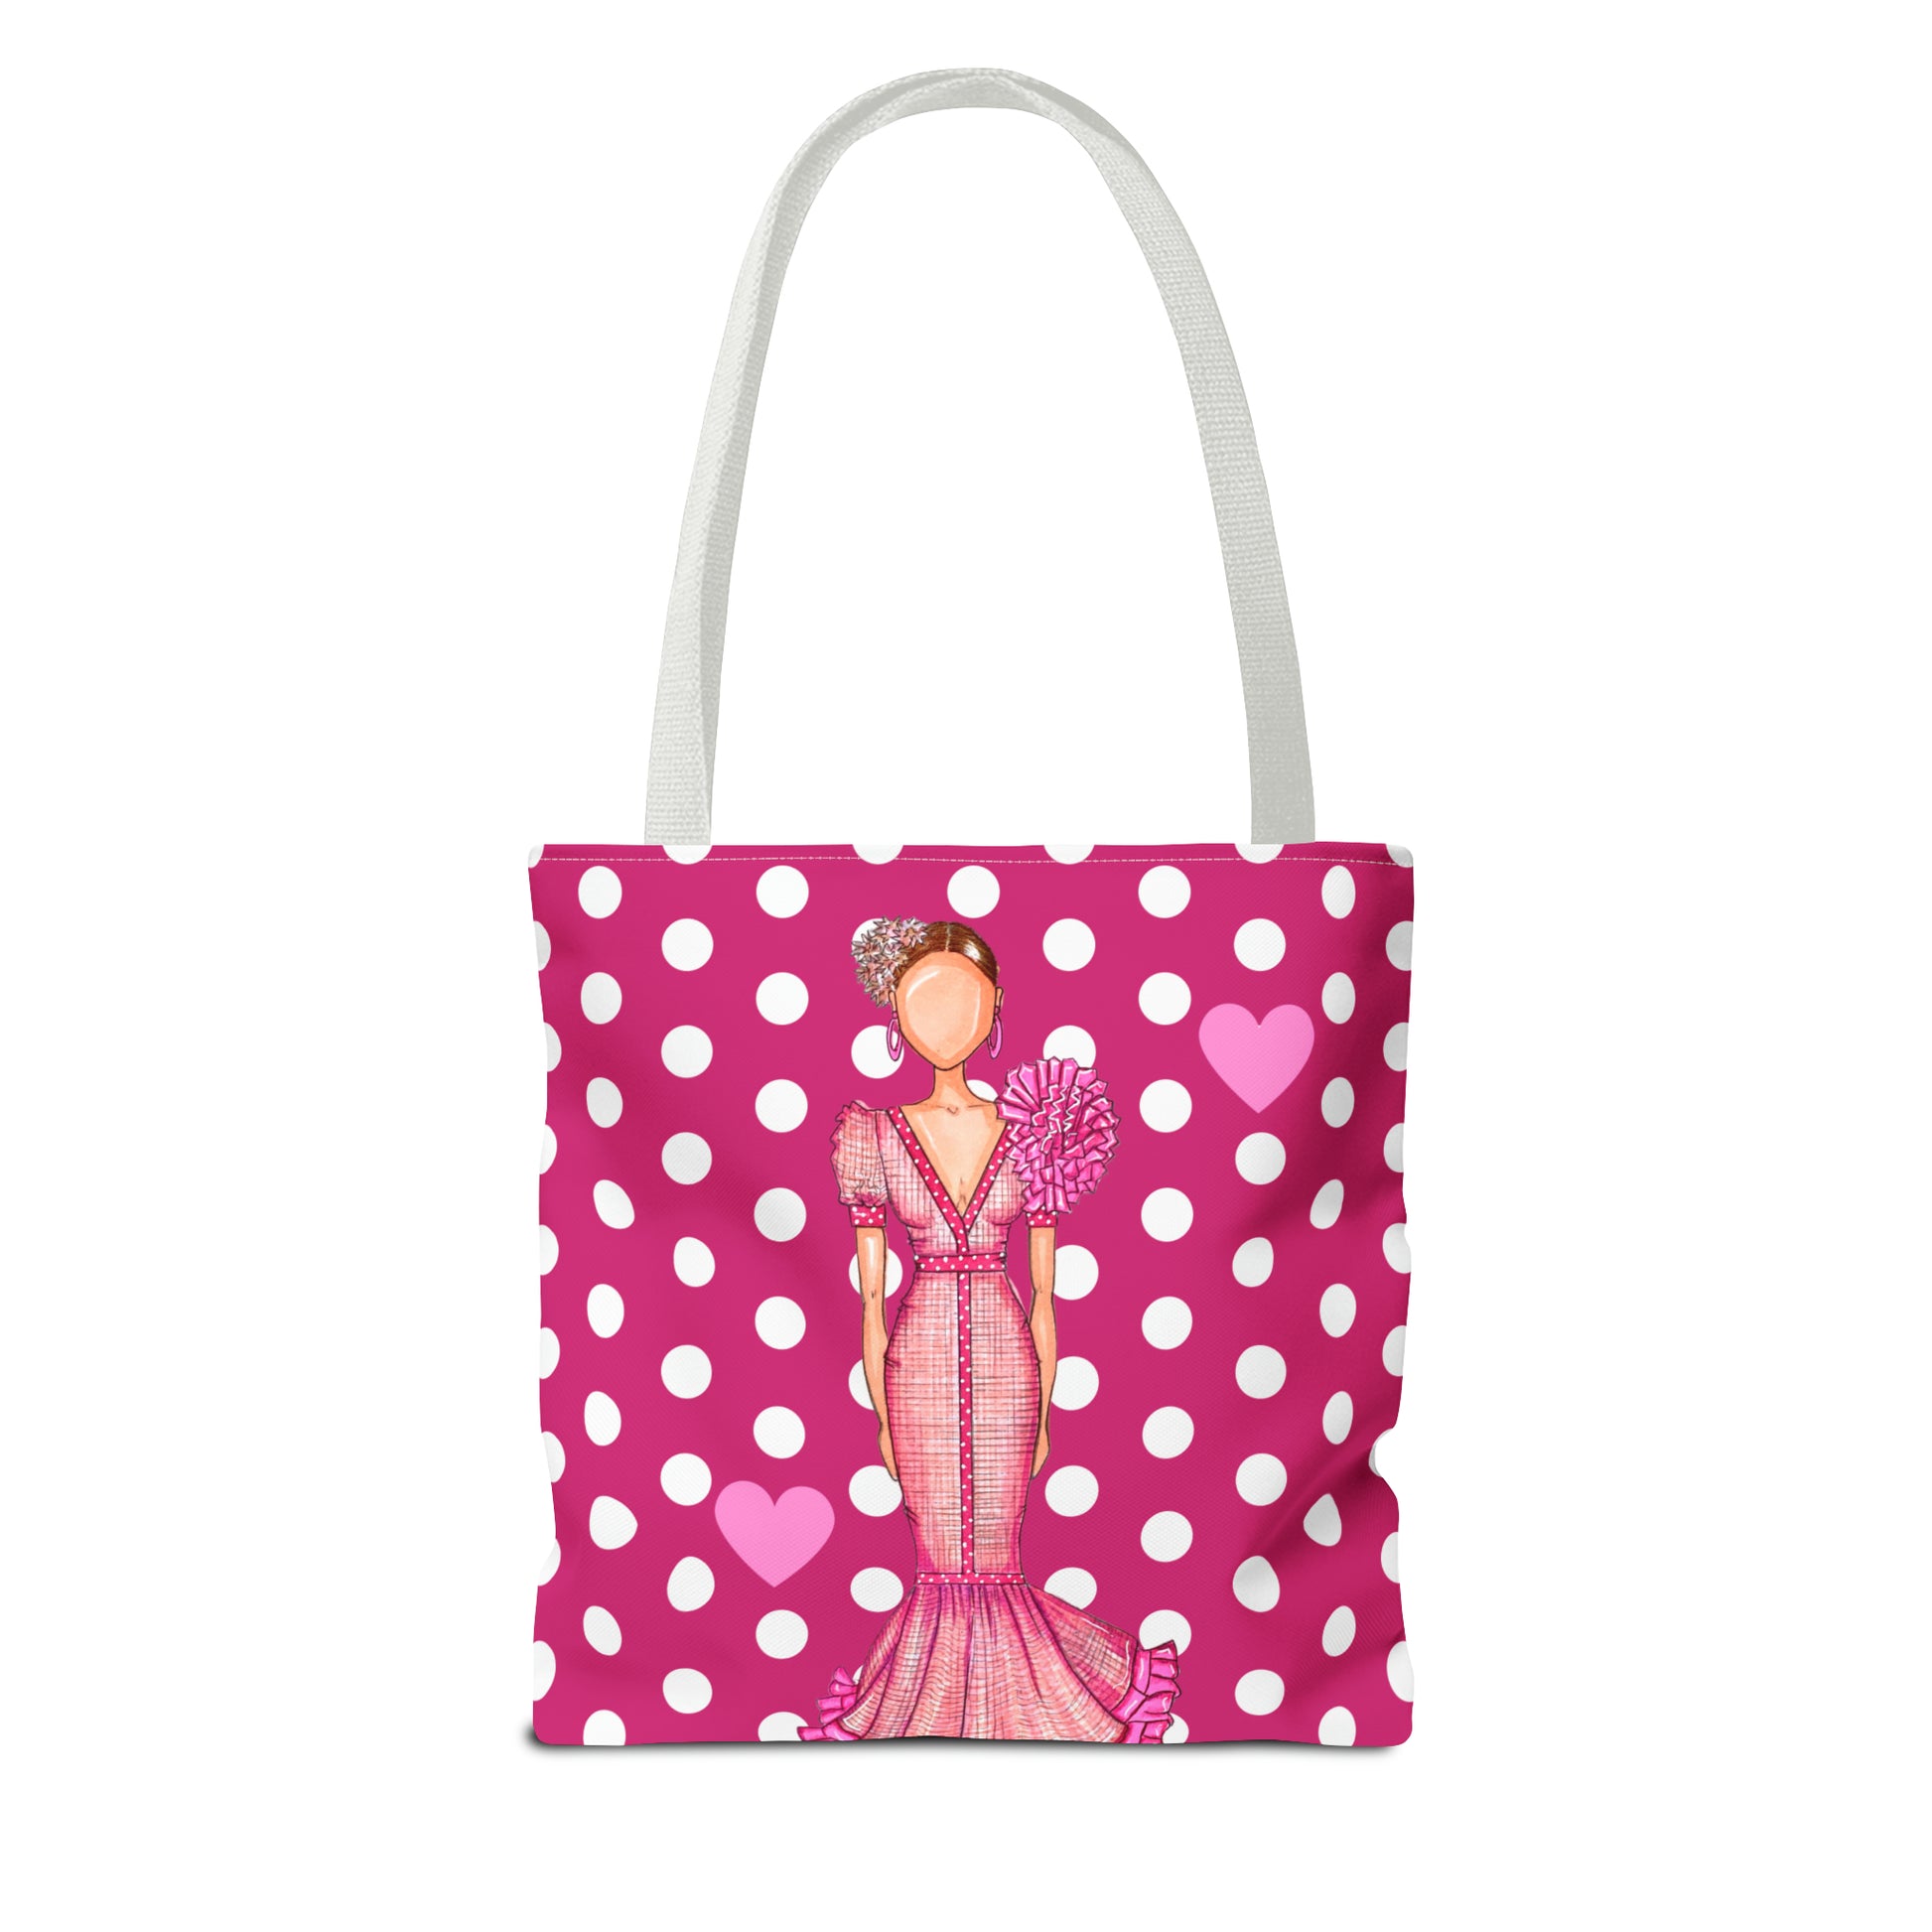 a pink and white polka dot bag with a woman in a pink dress